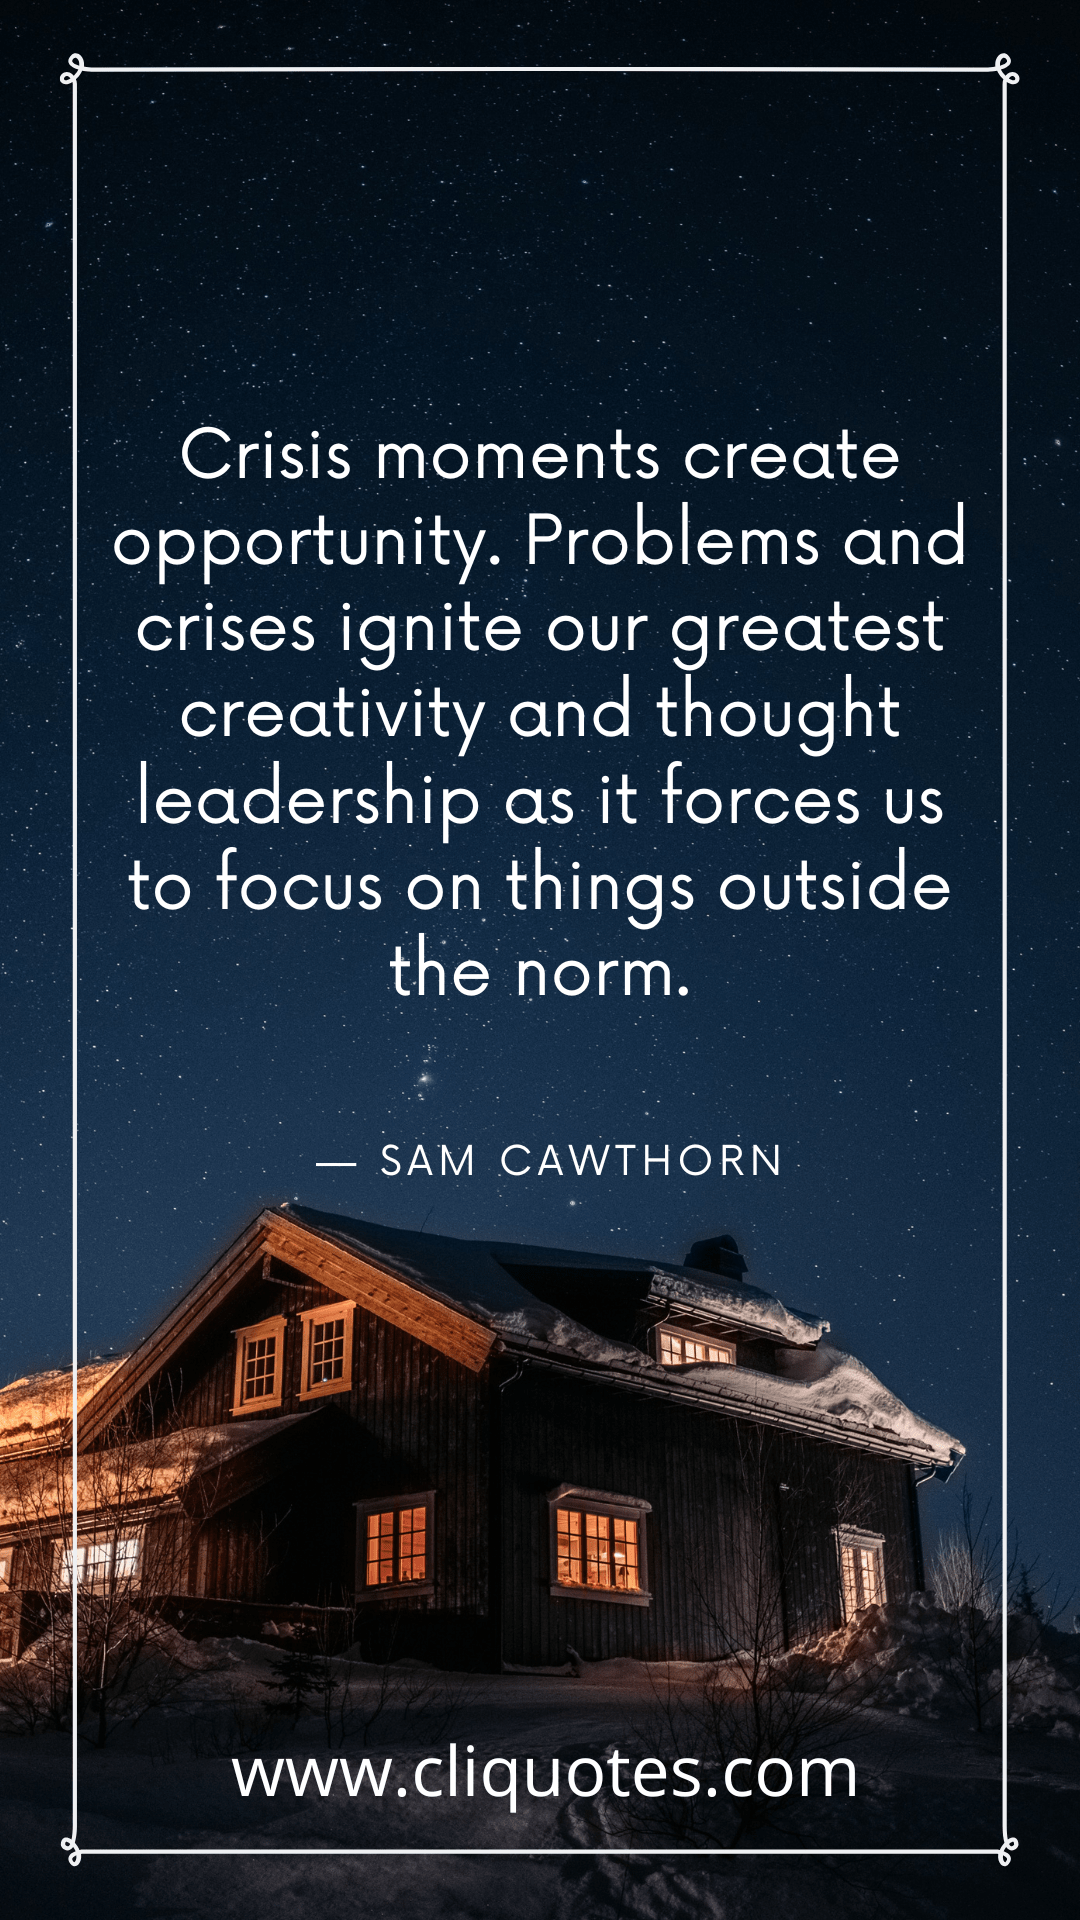 Crisis moments create opportunity. Problems and crises ignite our greatest creativity and thought leadership as it forces us to focus on things outside the norm. — SAM CAWTHORN